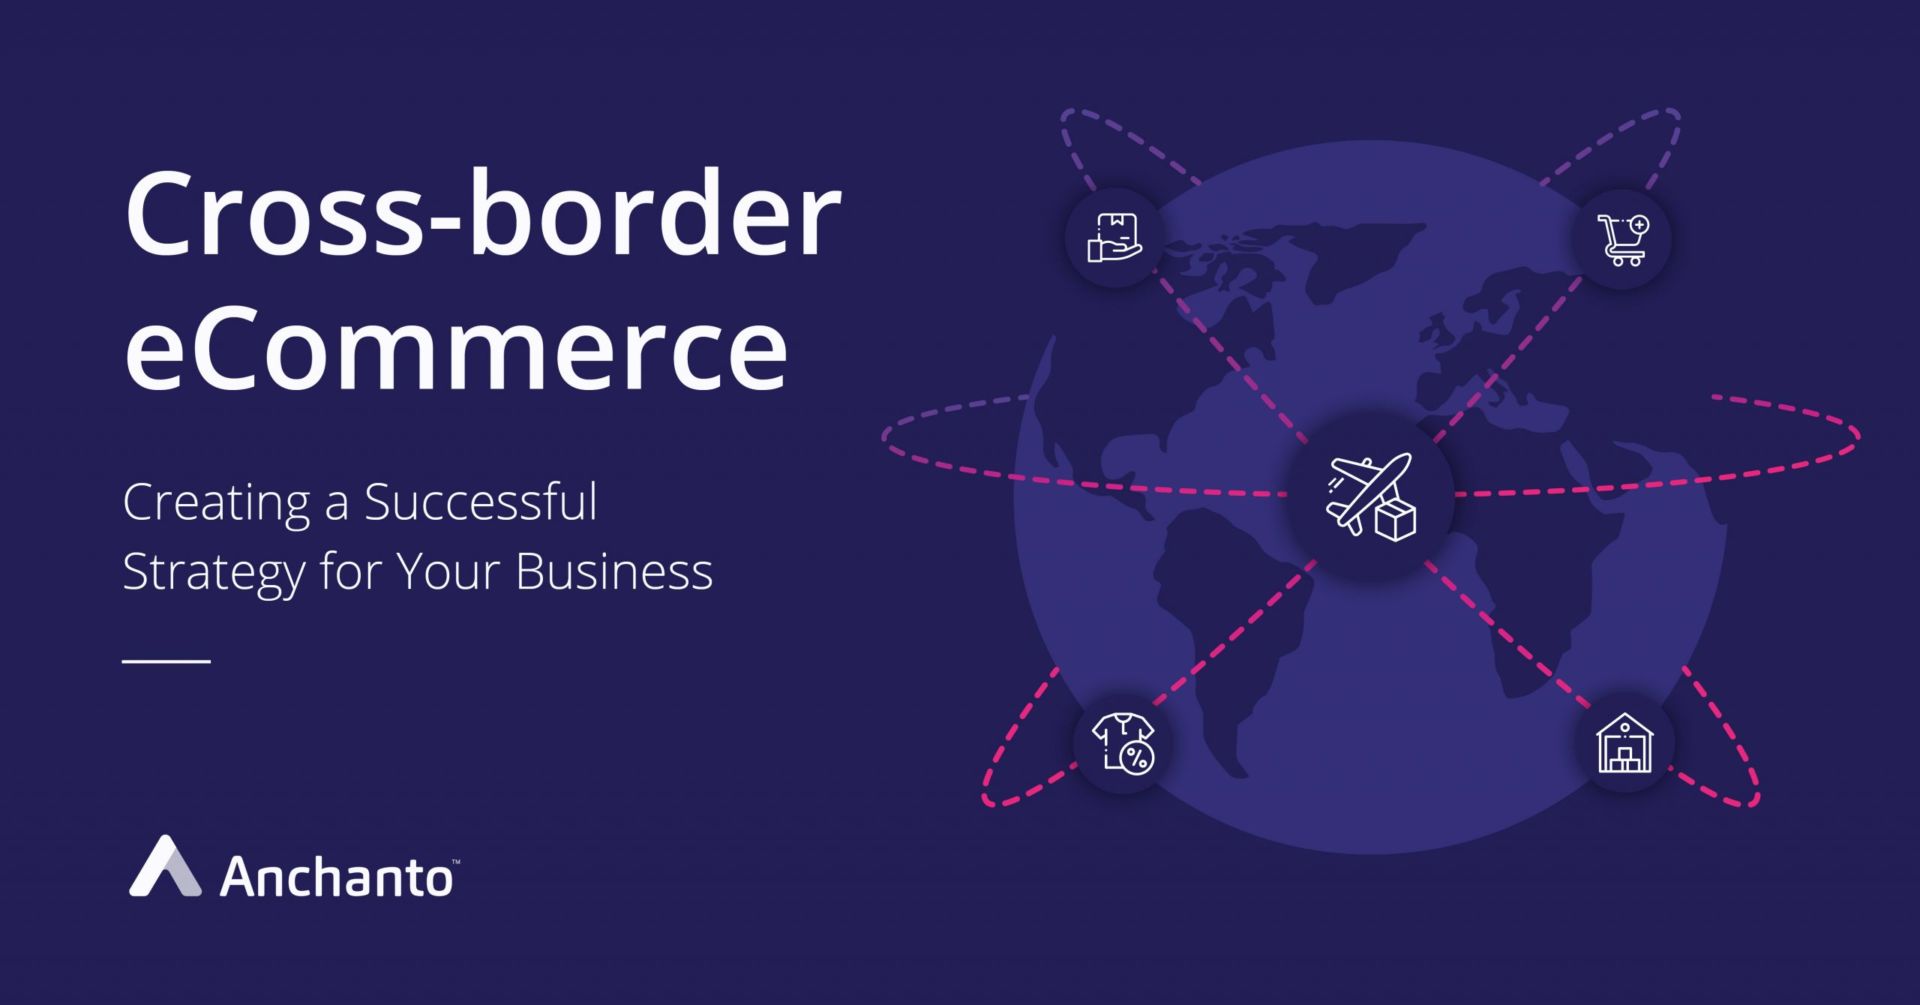 Creating a Successful Cross-border E-commerce Strategy for Your Business